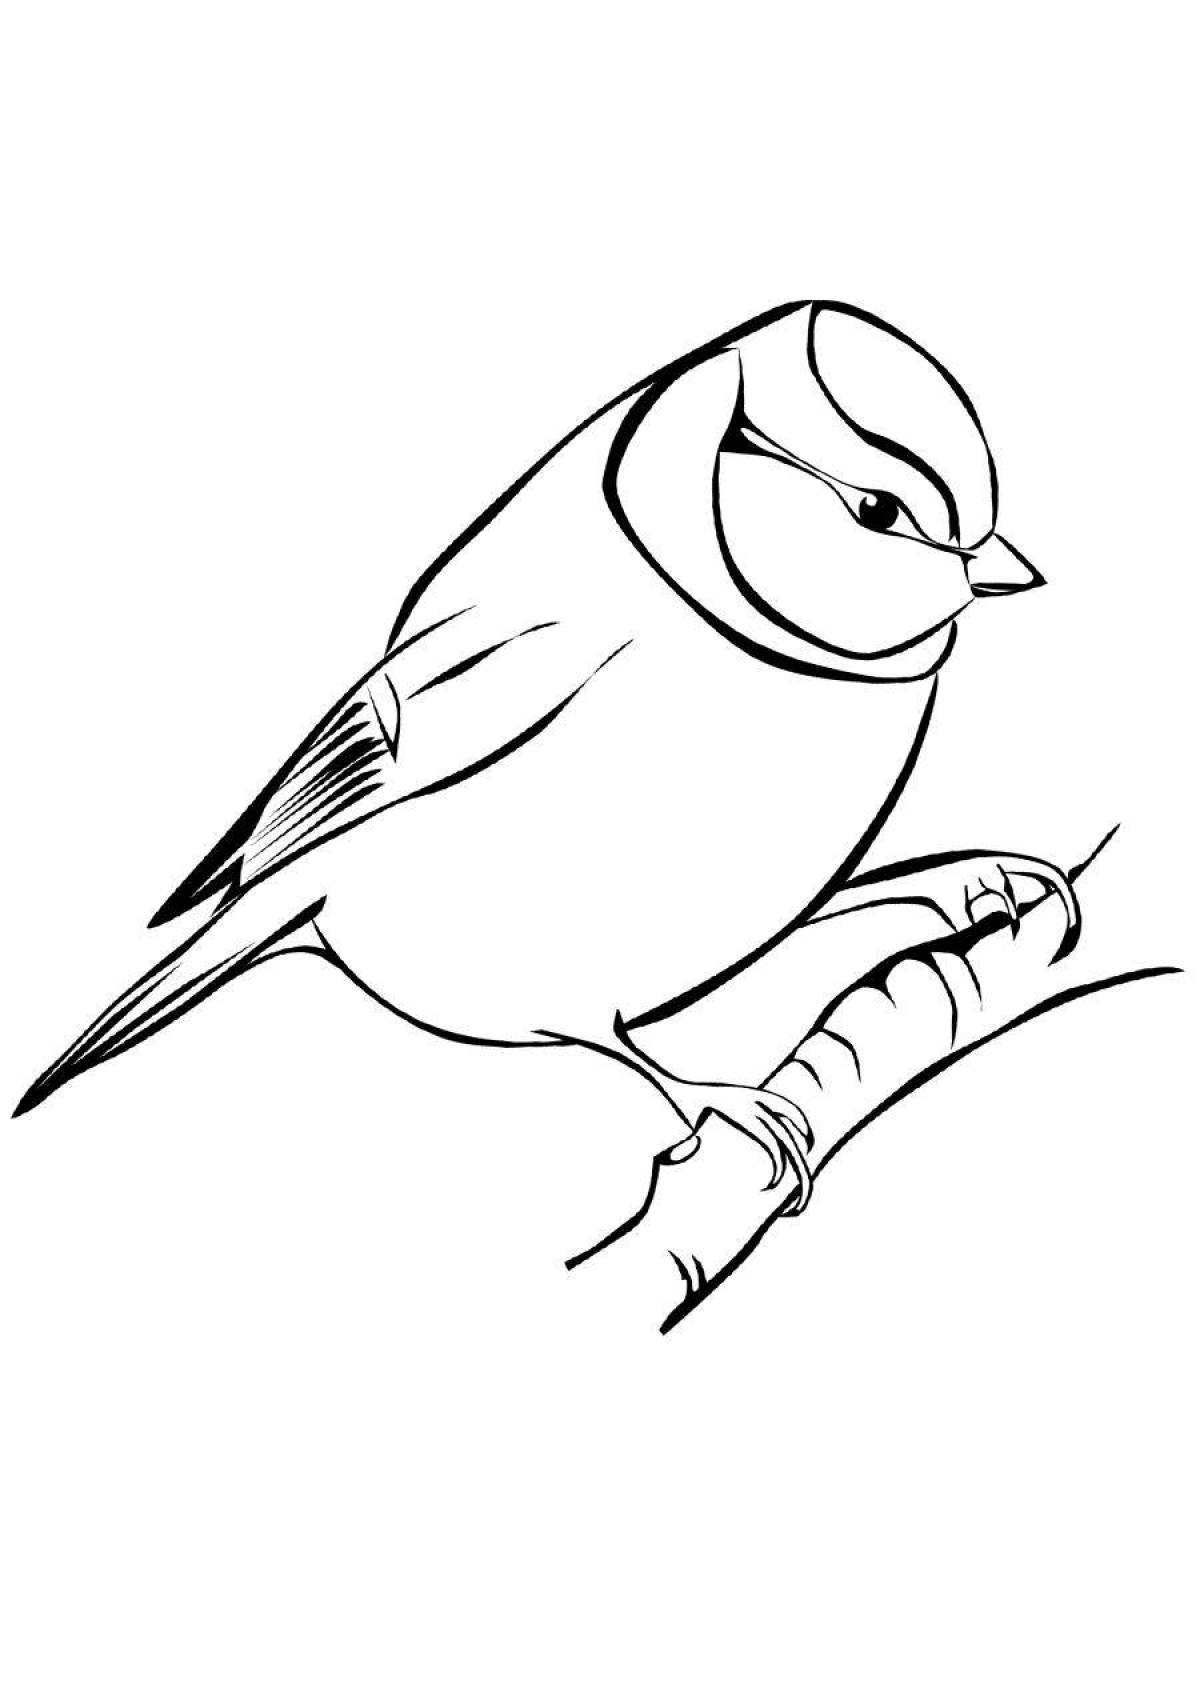 Coloring page with exciting drawing of tits